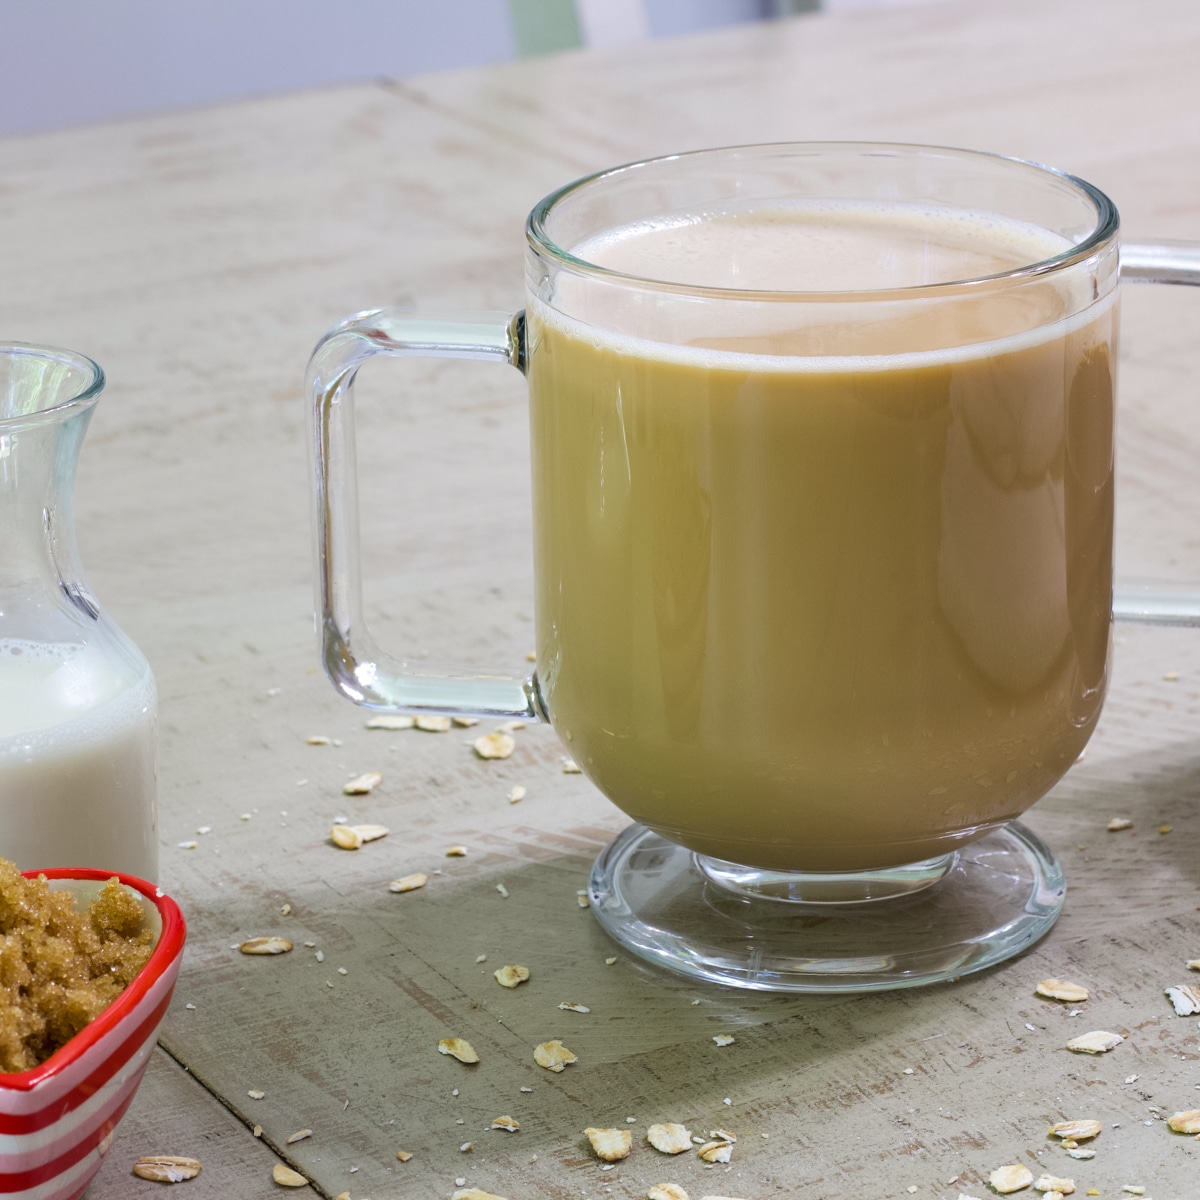 https://www.mindyscookingobsession.com/wp-content/uploads/2023/06/Easy-Delicious-Brown-Sugar-Oat-Milk-Coffee-Recipe-1200.jpg